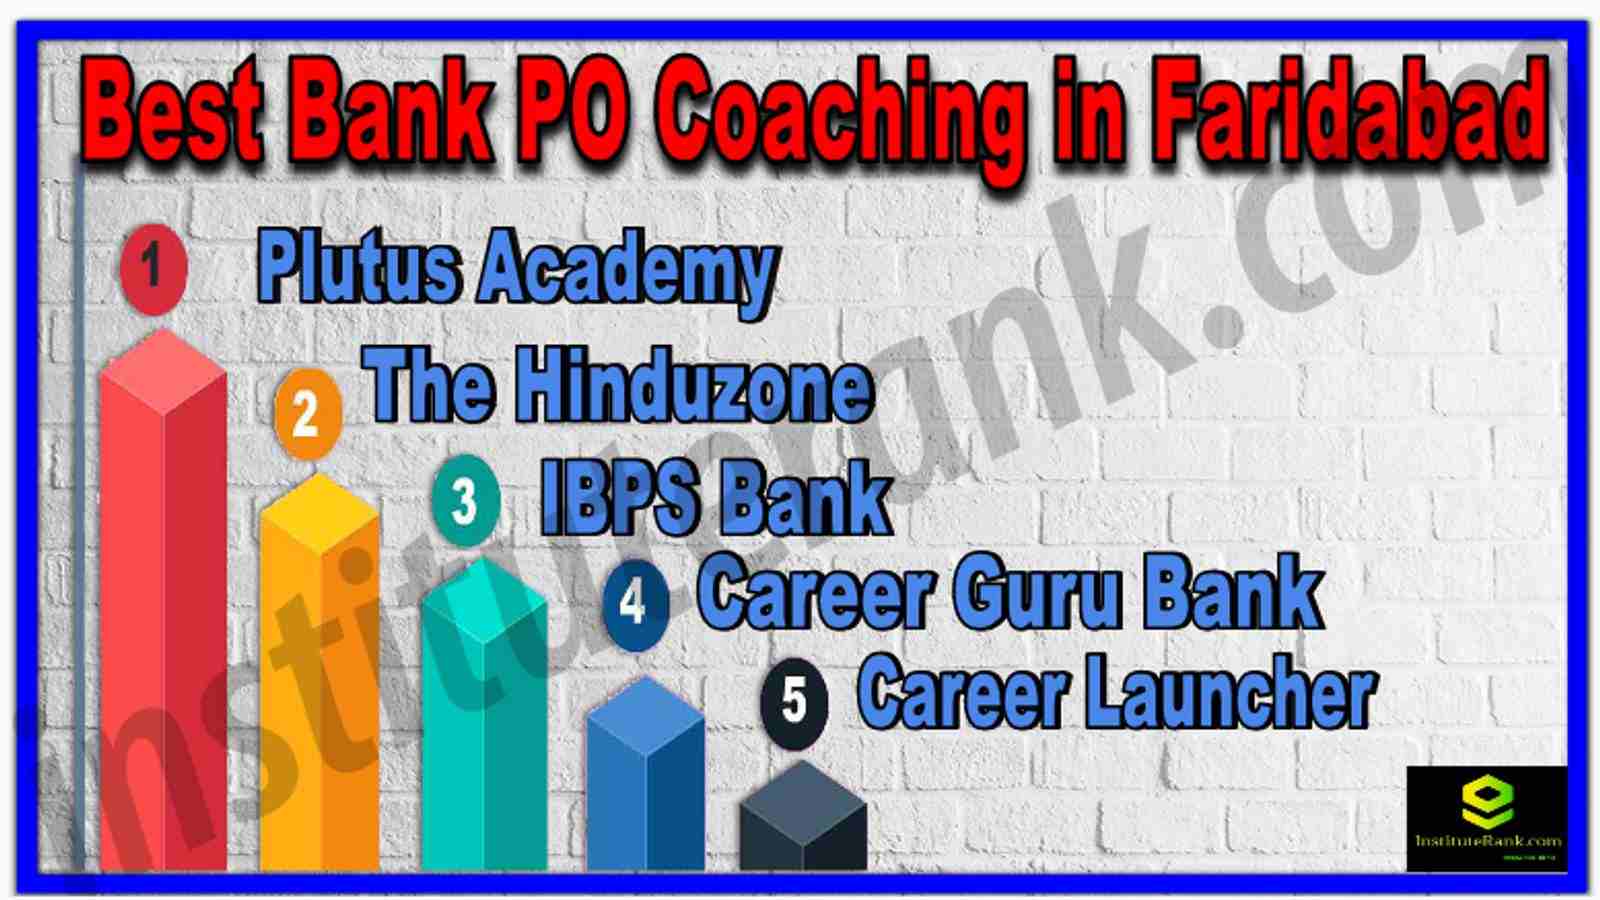 Best Bank PO Coaching in Faridabad